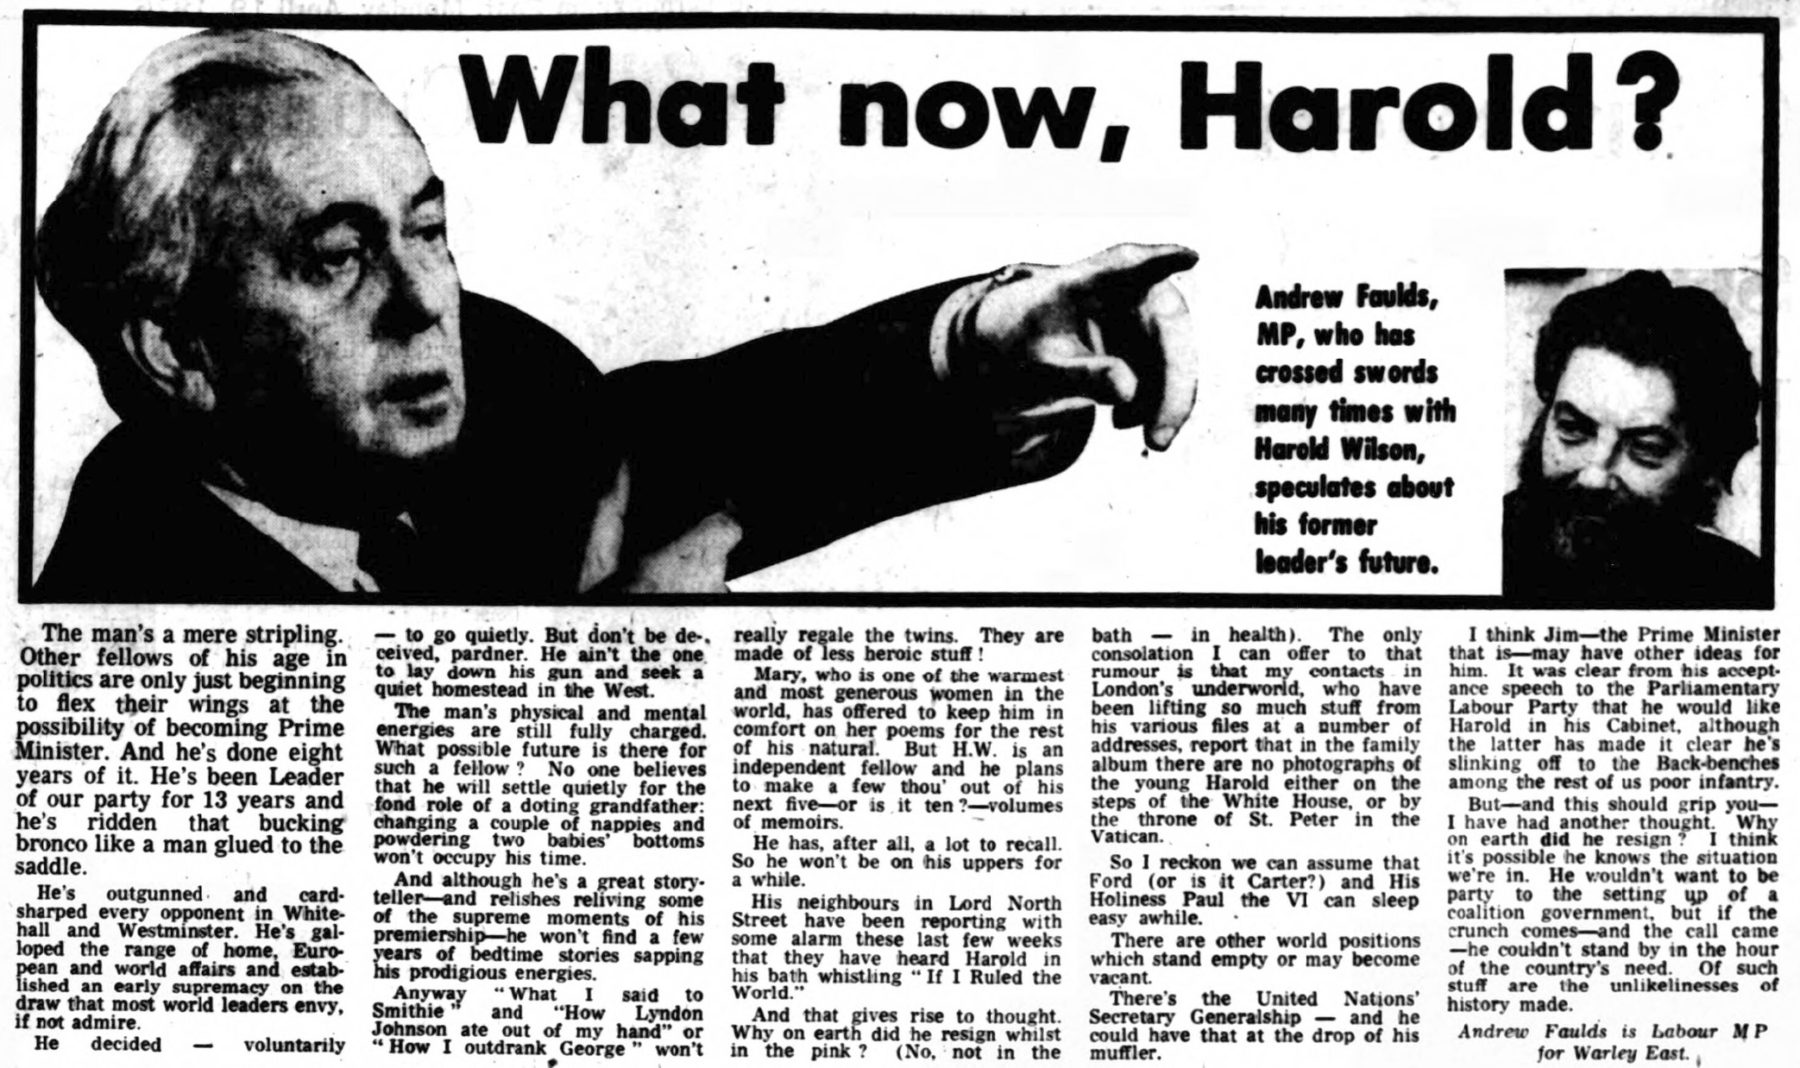 What Now Harold? by Andrew Faulds, MP